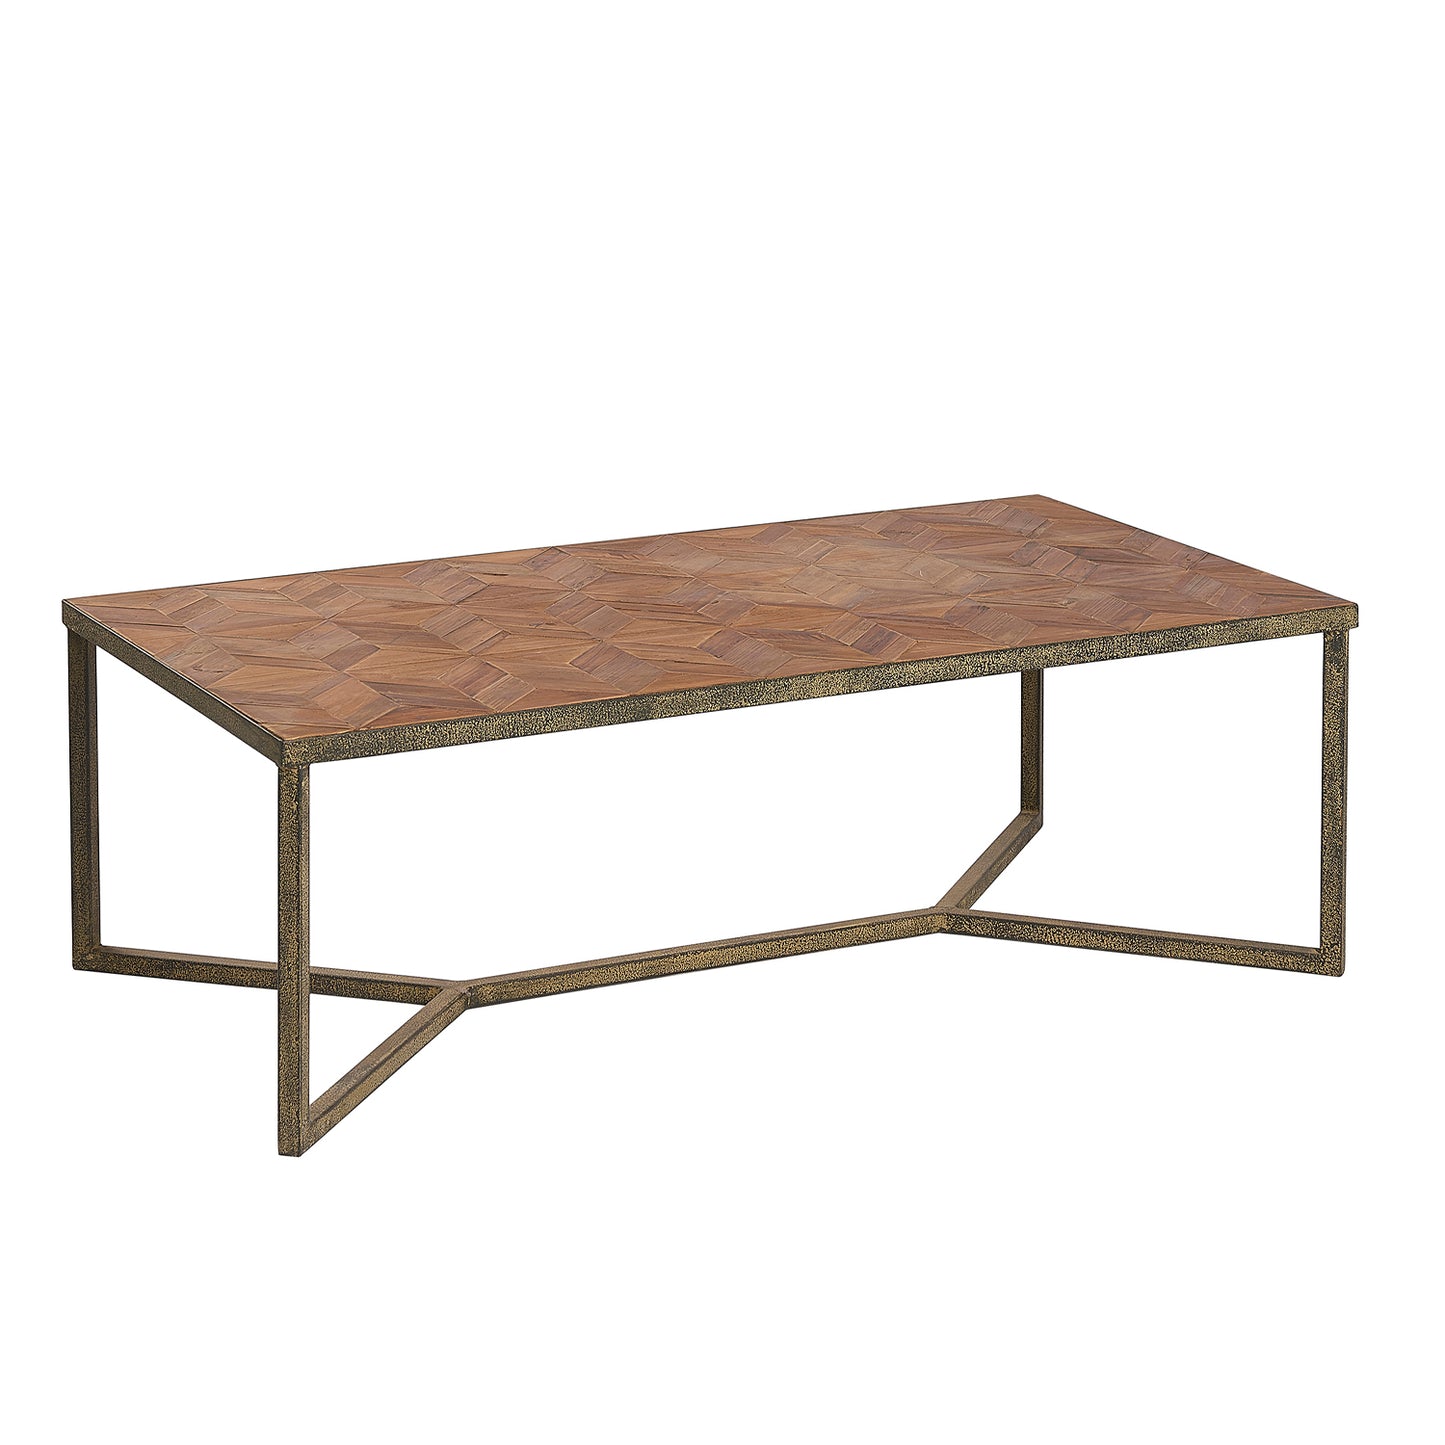 Lambs Green - Reclaimed Pine Parquet Top Coffee Table